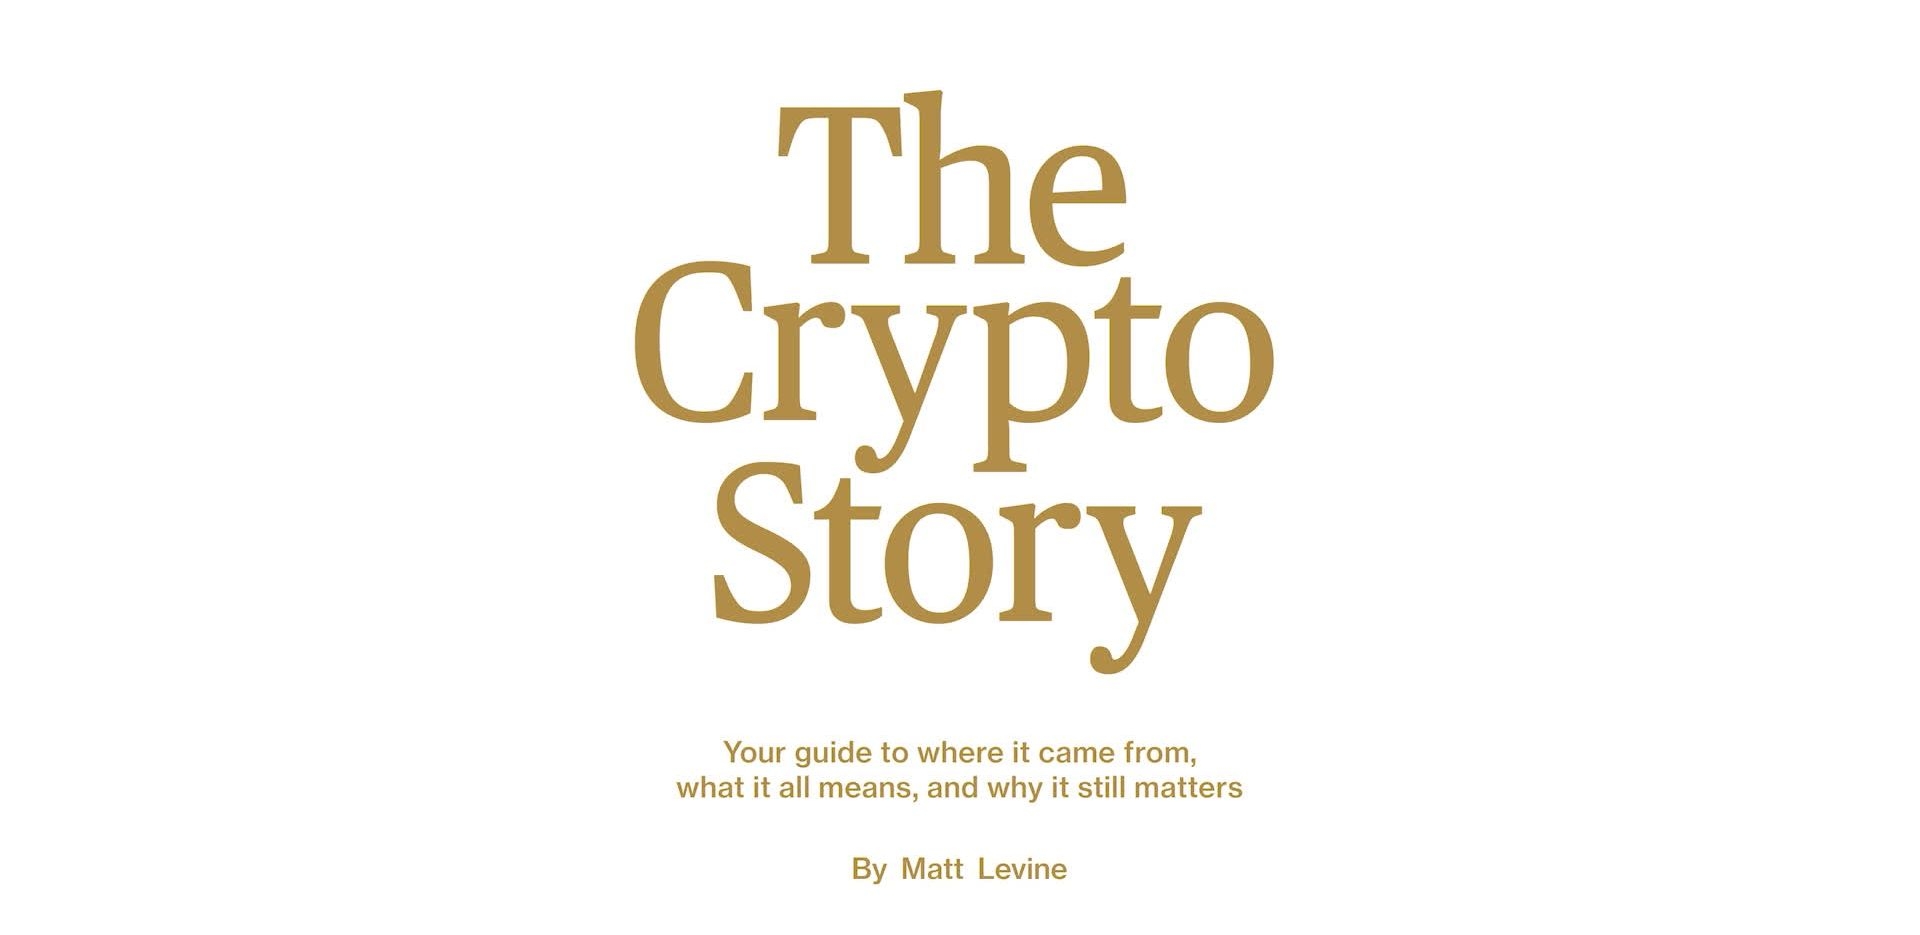 In this article, we are going to be covering 40,000-word Matt Levine Crypto Story, and sharing with you the key takeaways, so you can take insight from the essay.